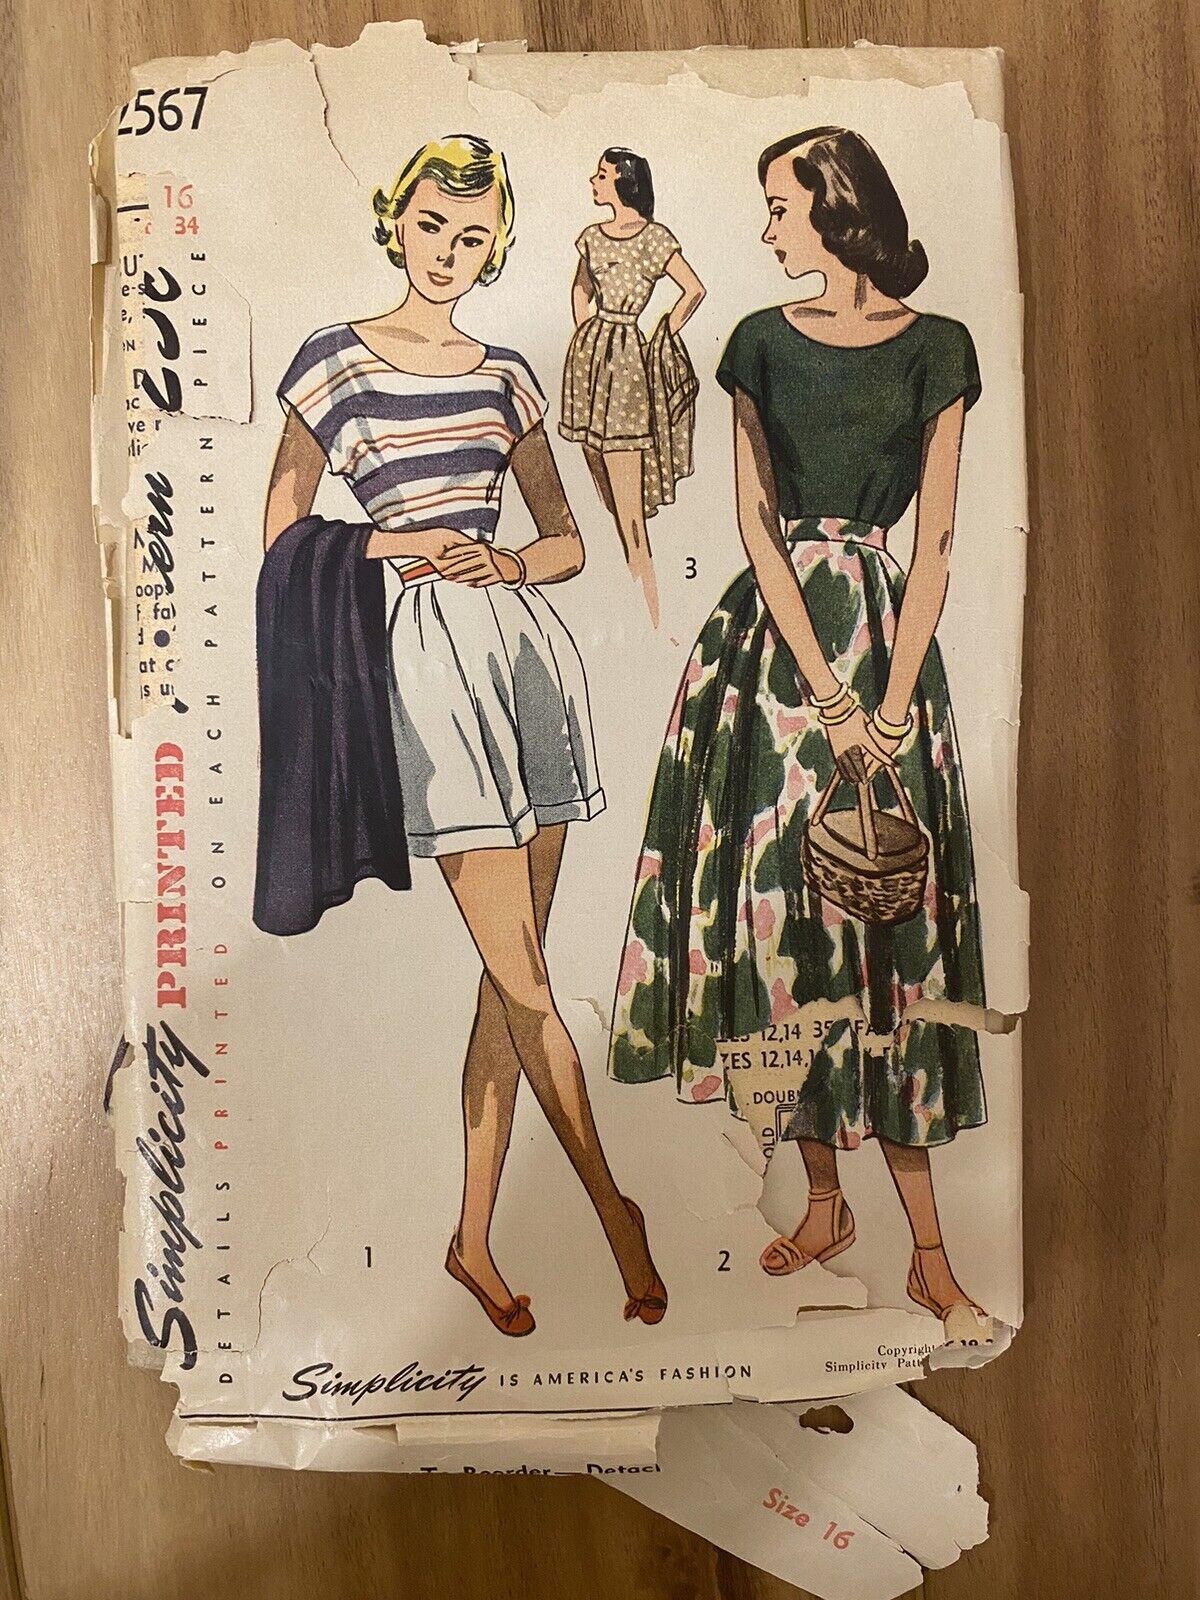 Vintage Simplicity 2567 Skirt Top And Shorts Sewing Pattern Size 16 Bust 34”